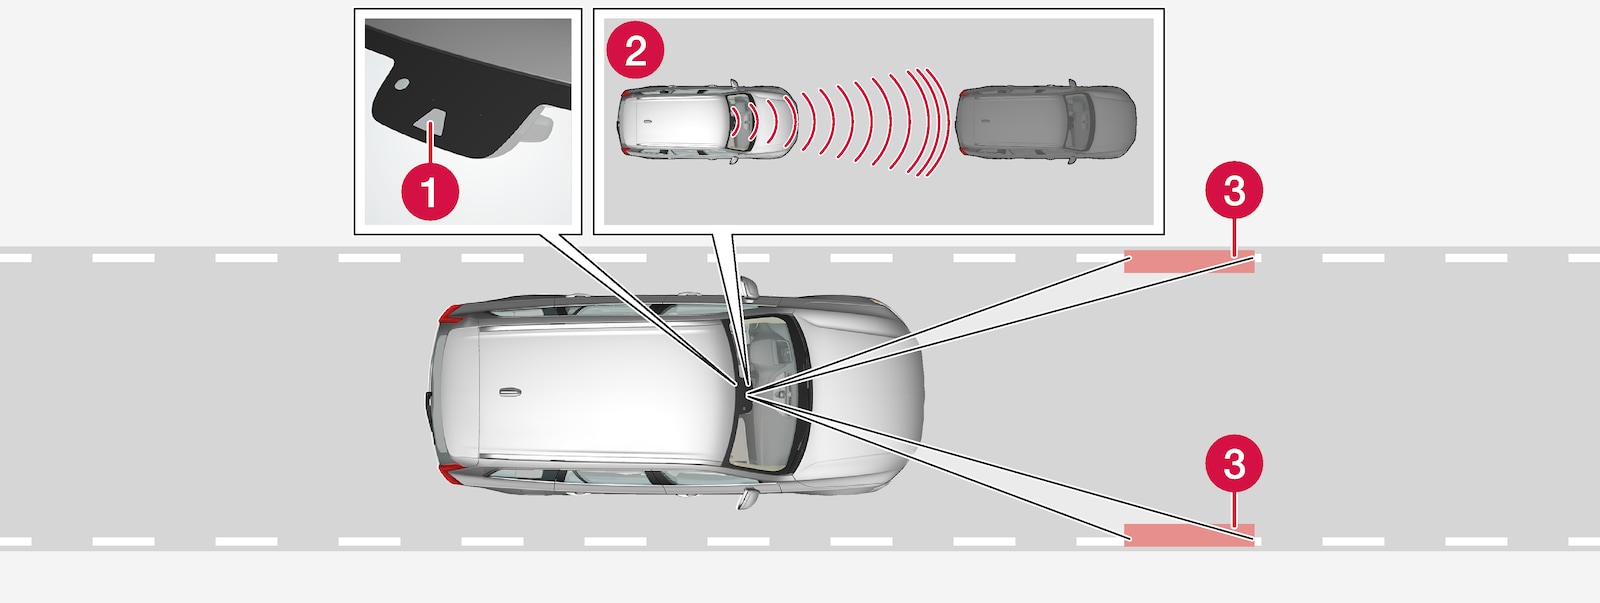 P5-1507-Adaptive Cruise Control, overview detection of vehicle ahead and side markings